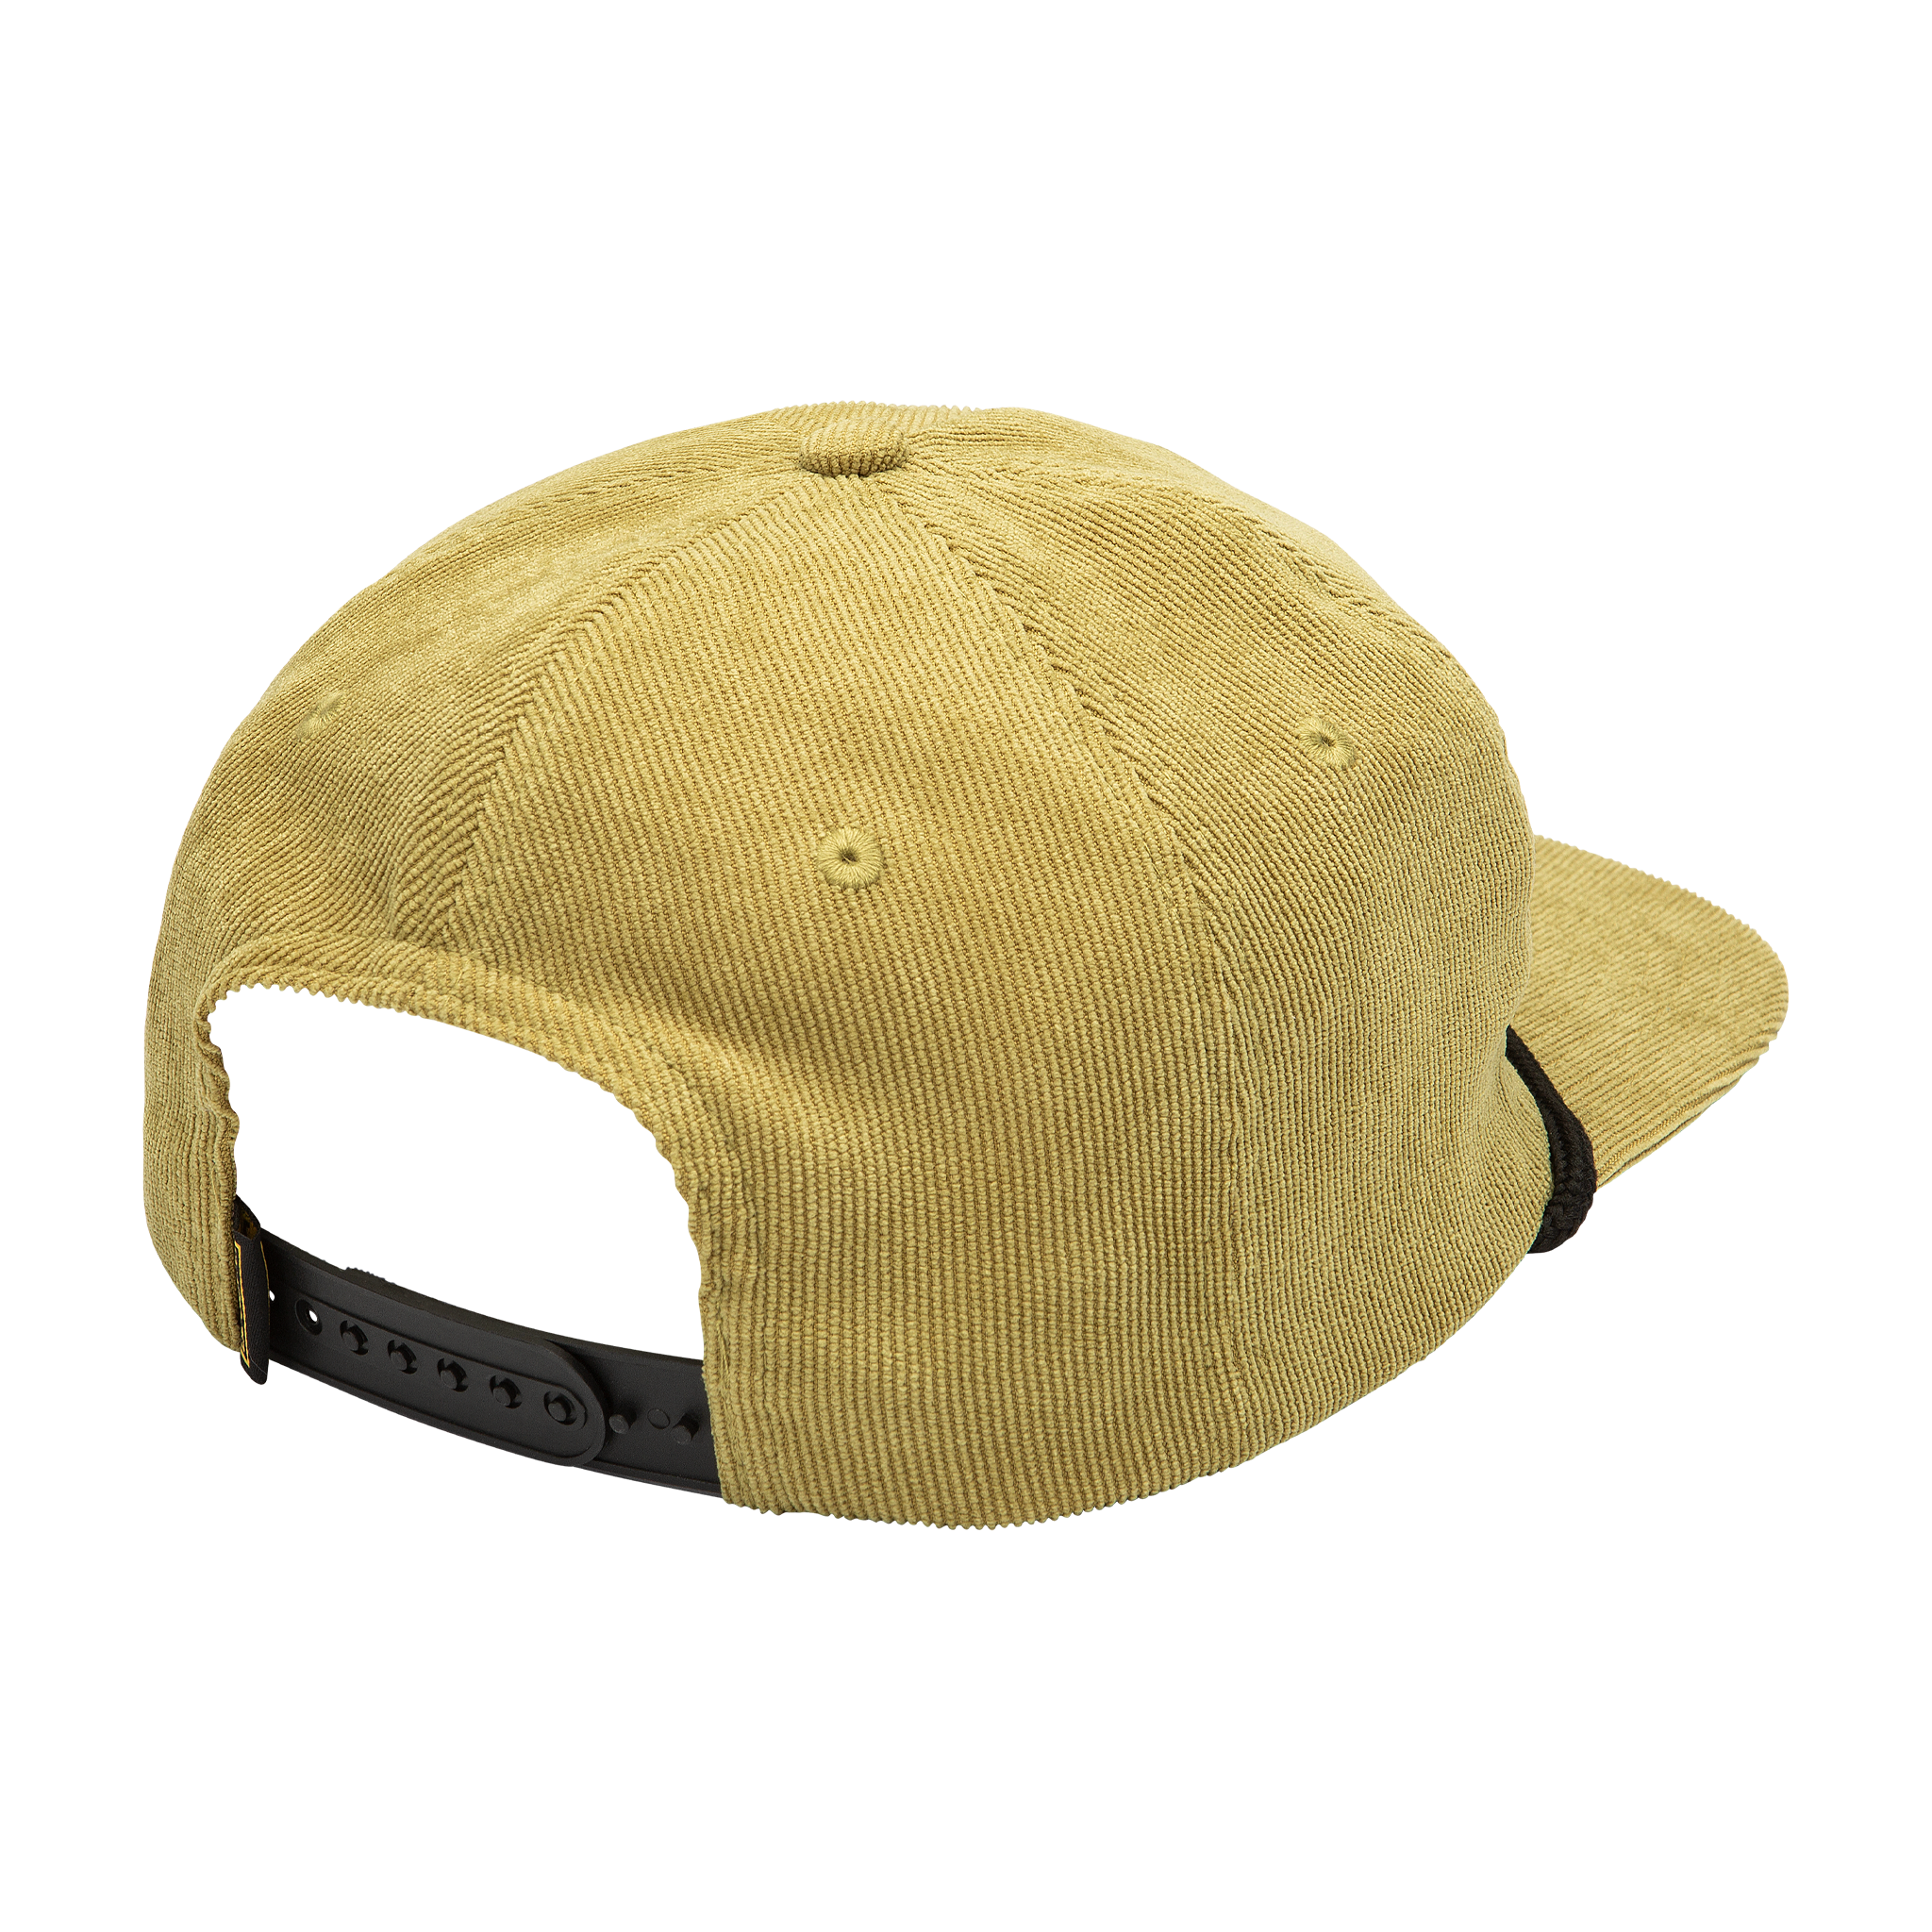 Captain Fin Big Patch Hat, Color: Mineral Yellow, Size: O/S